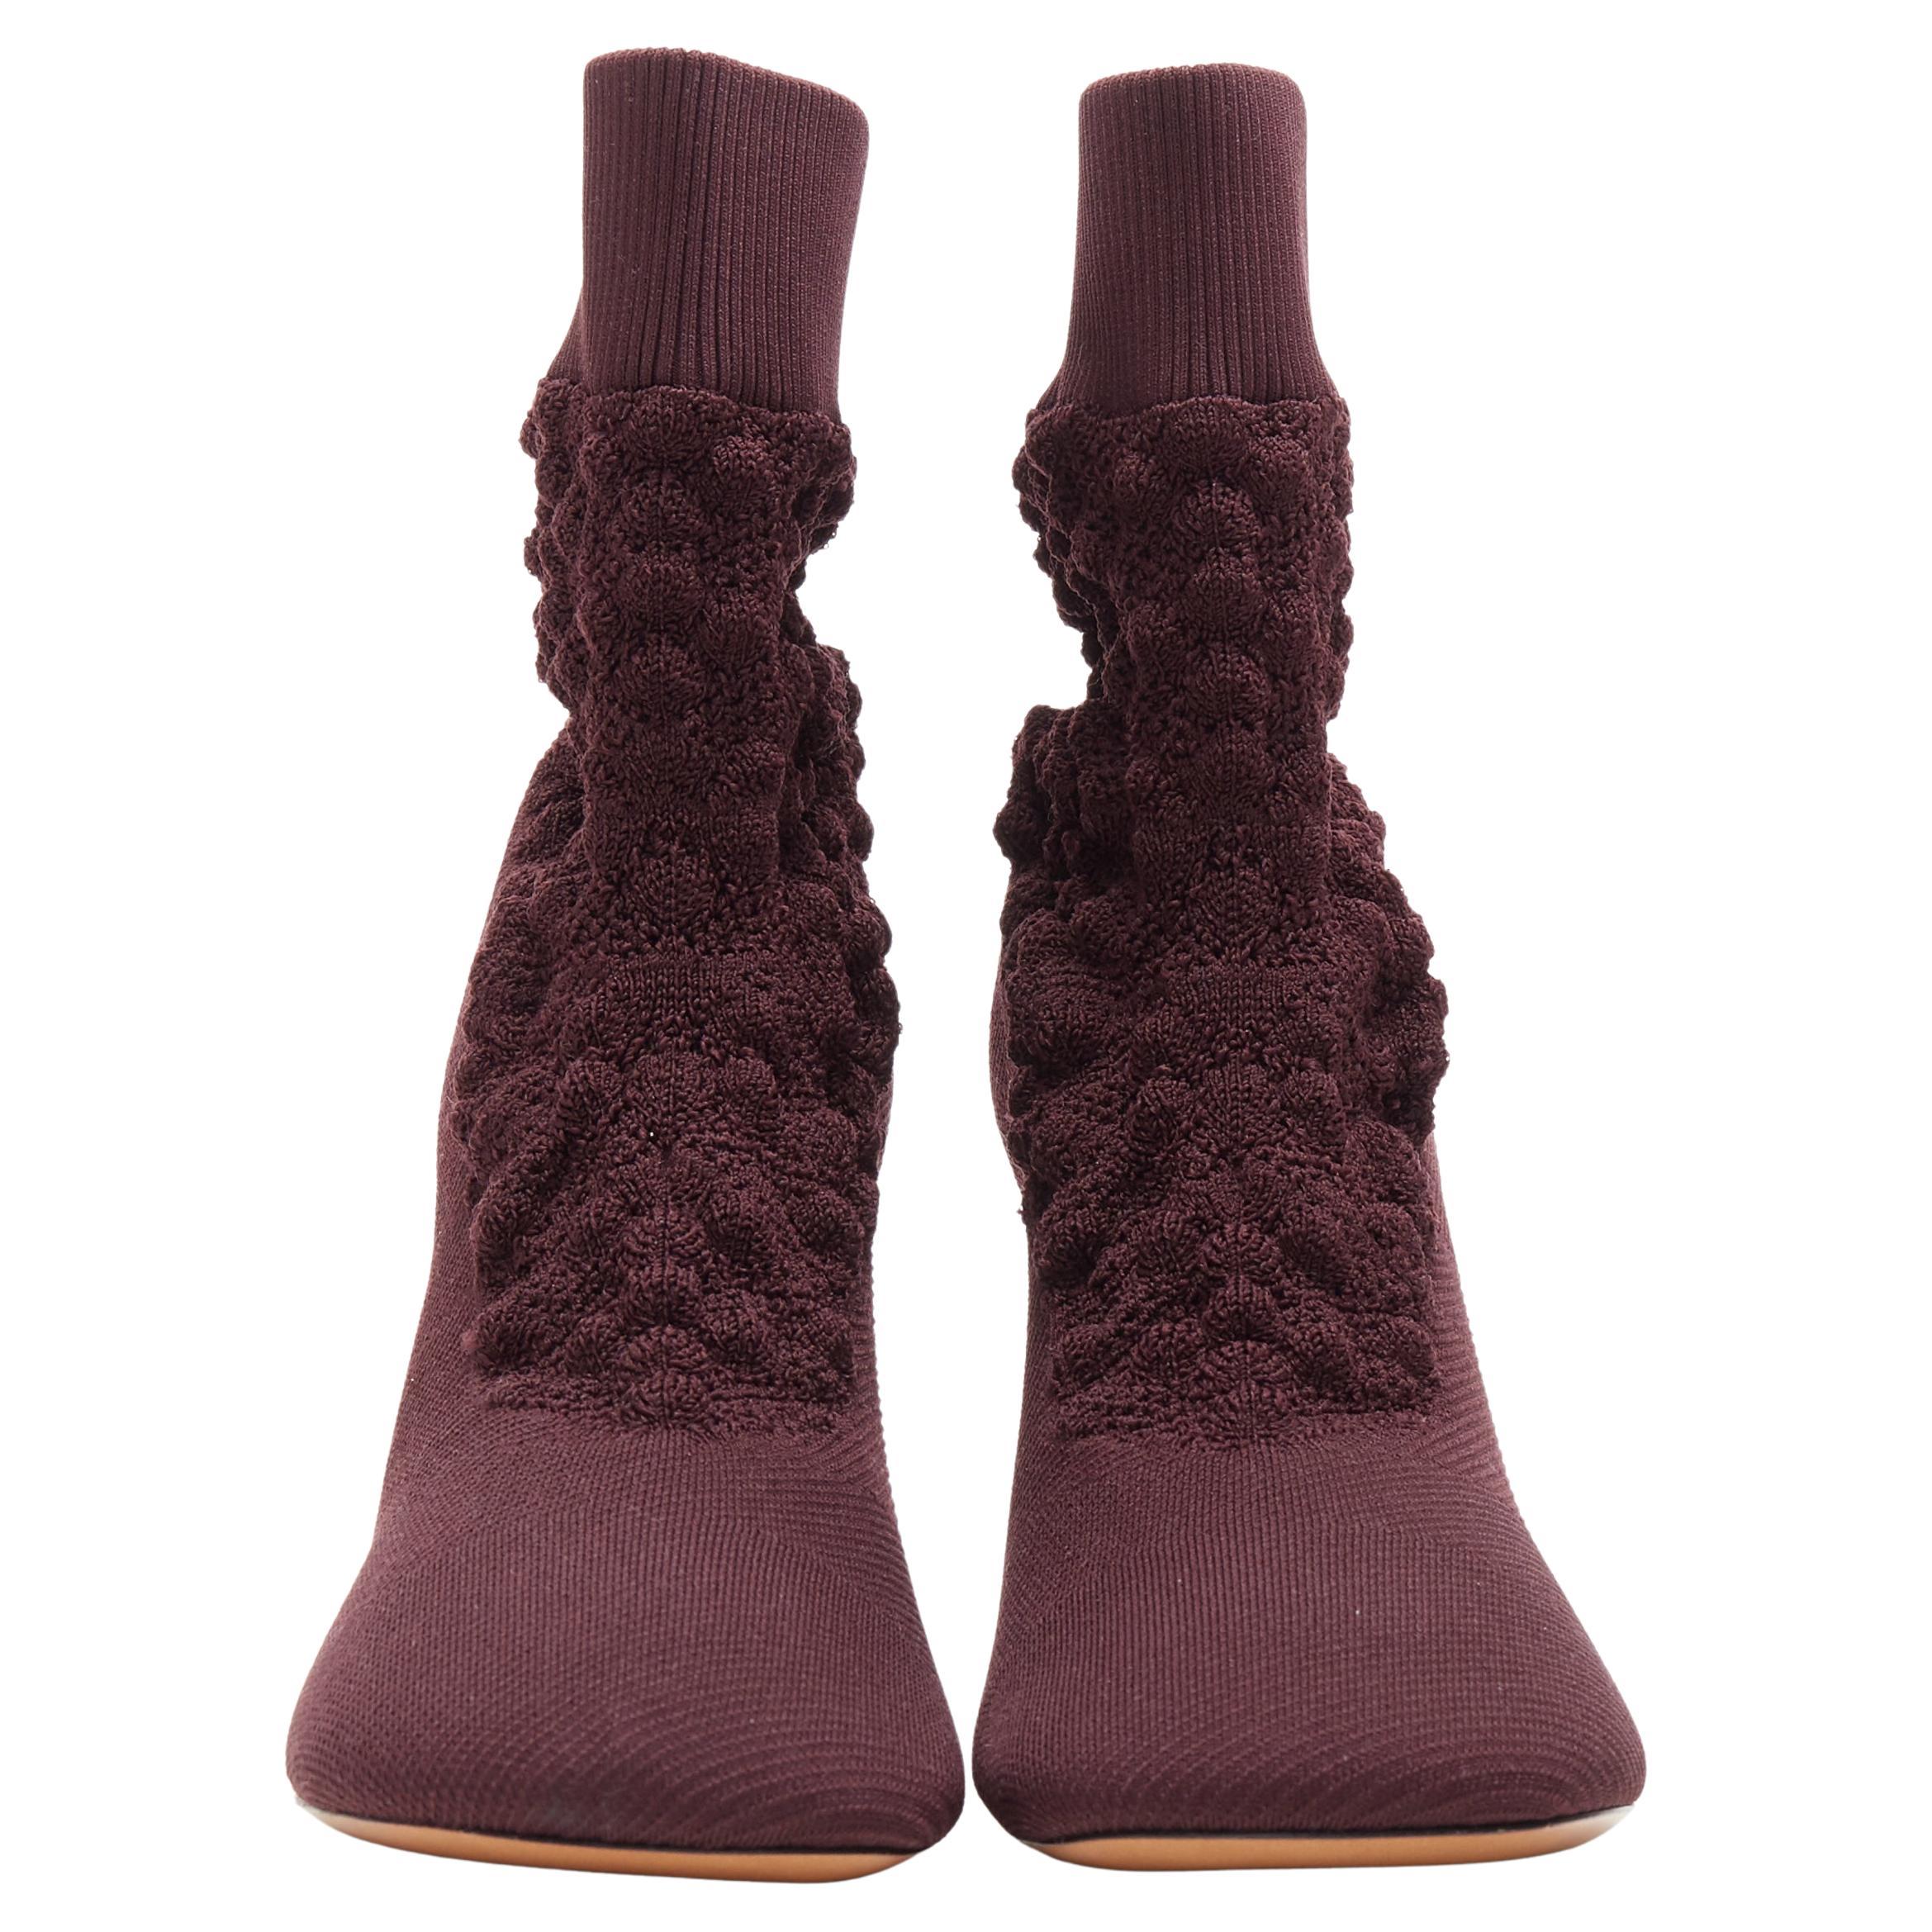 new OLD CELINE Glove Bootie burgundy textured sock knit square toe boots EU40 
Reference: TGAS/A04321 
Brand: Celine 
Designer: Phoebe Philo 
Material: Fabric 
Color: Burgundy 
Pattern: Solid 
Closure: Slip on 
Made in: Italy 

CONDITION: